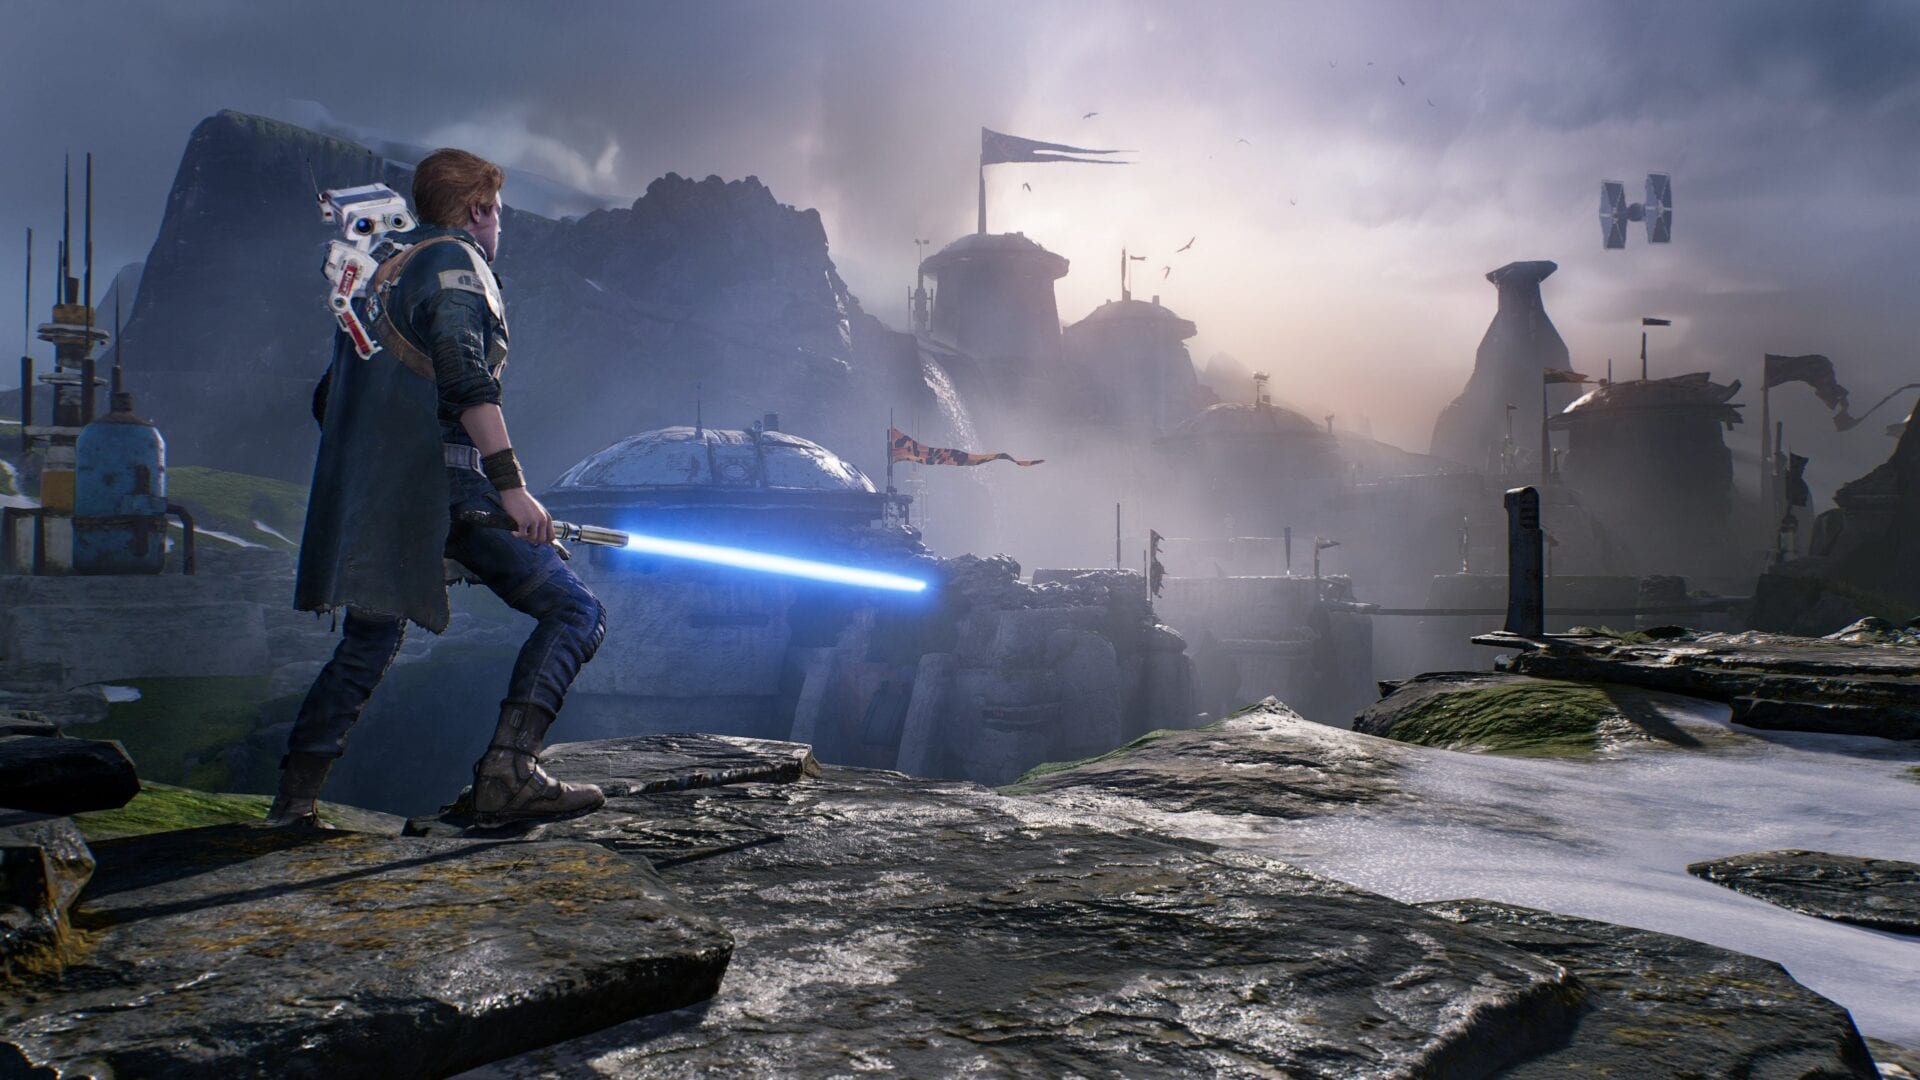 Lucasfilms Announces Open-World Star Wars Game To Be Developed by Ubisoft